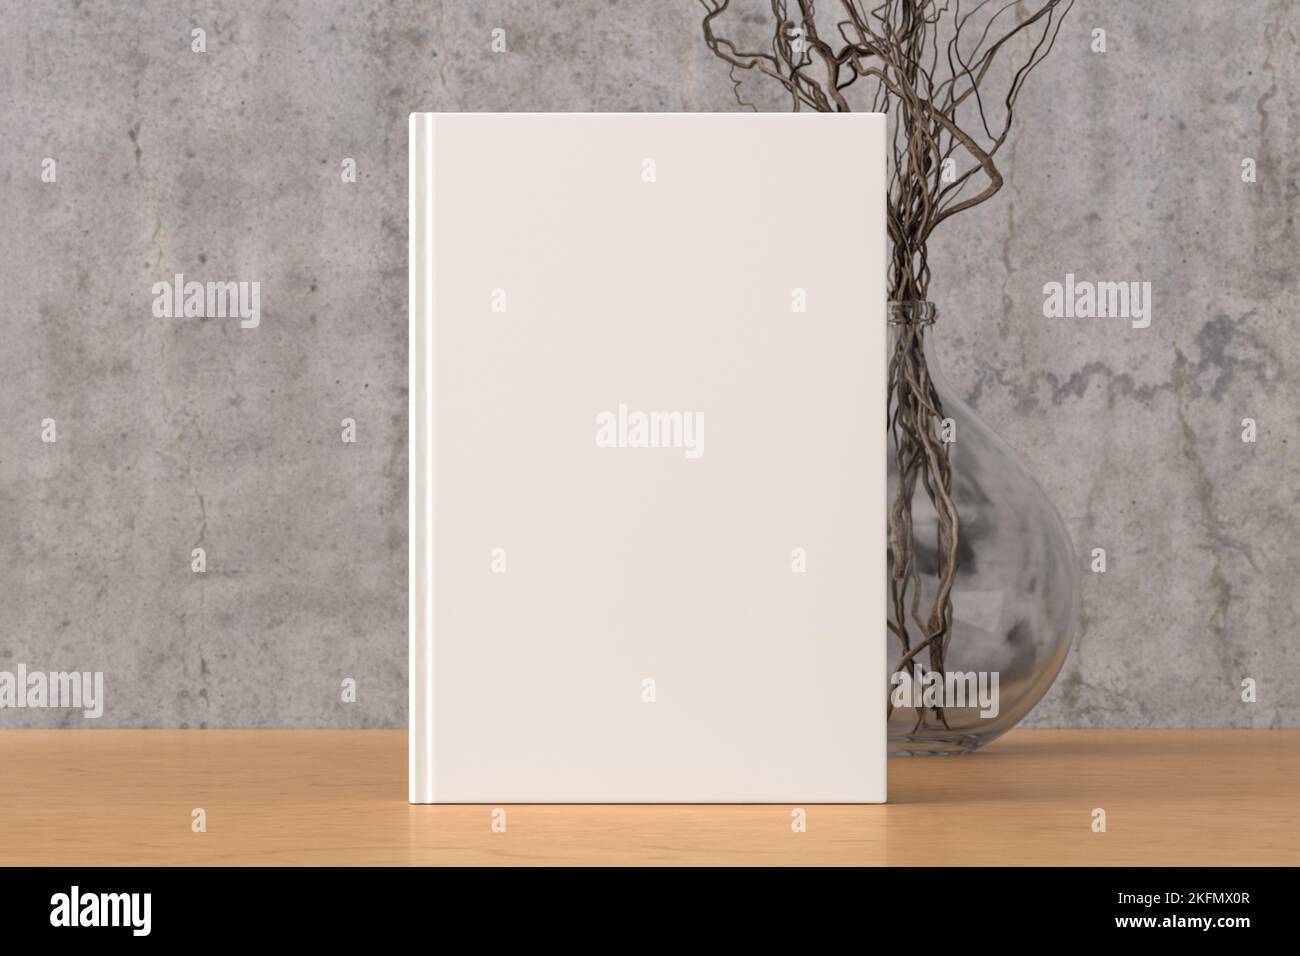 Vertical book cover mock up standing on a wooden desk with concrete wall background Stock Photo